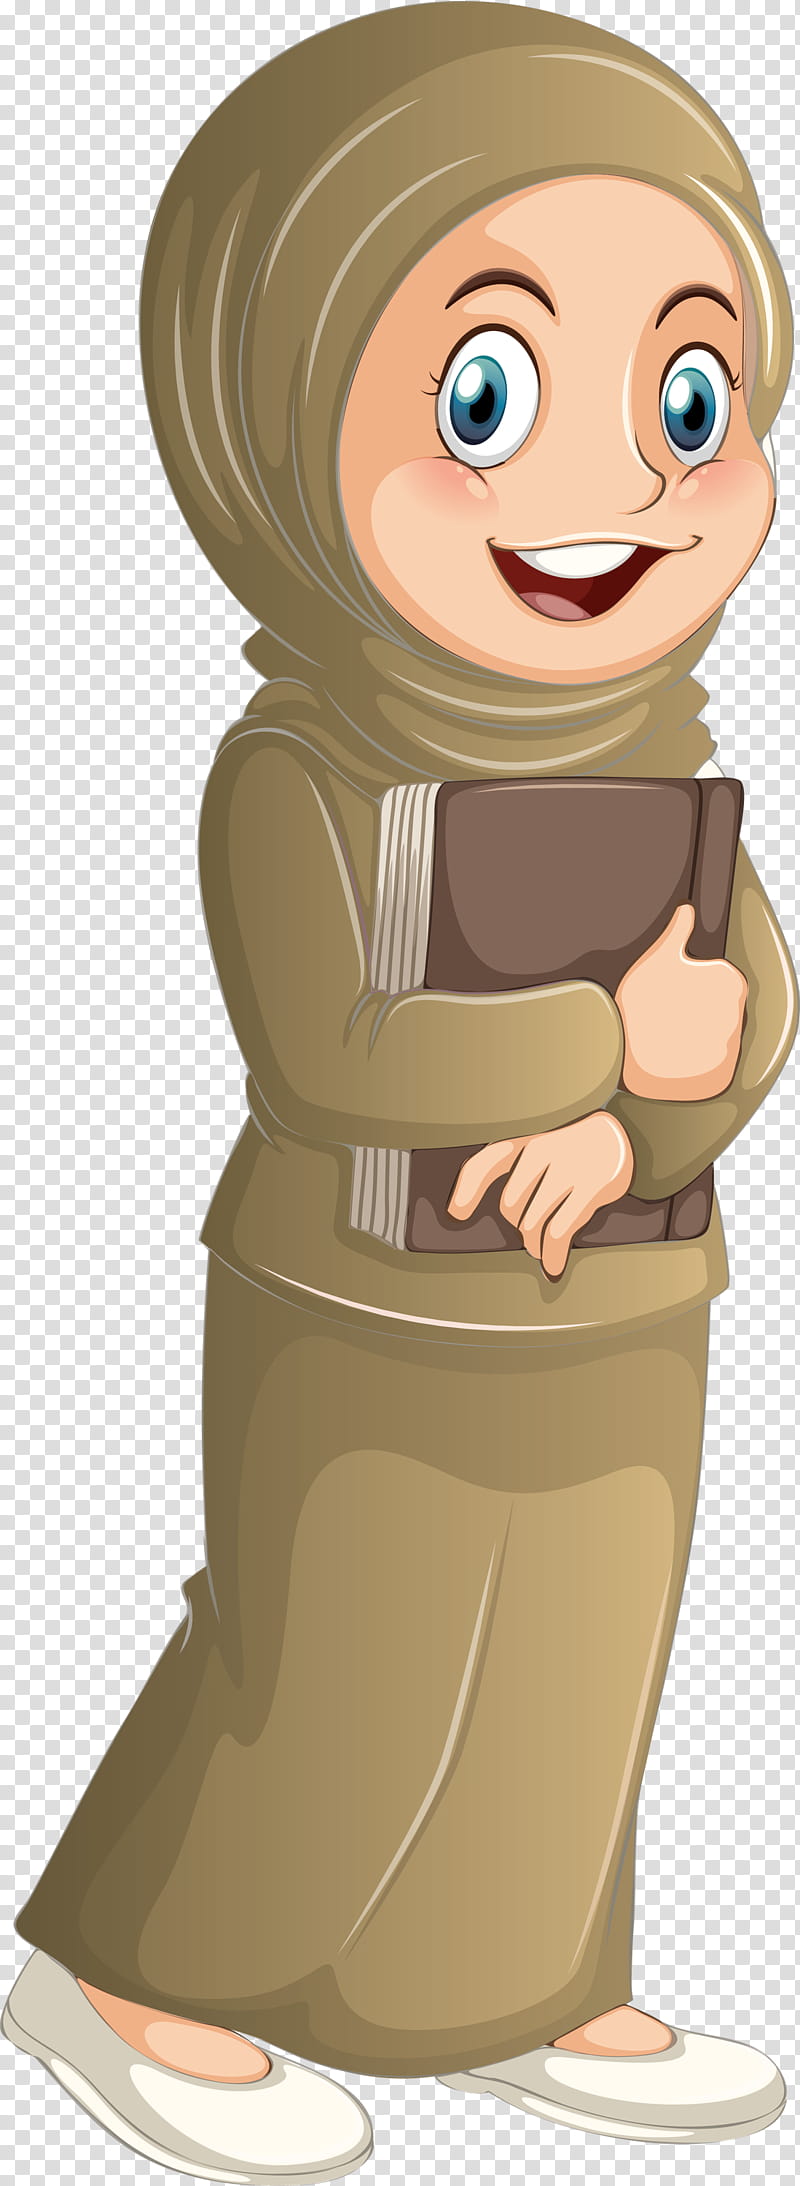 Muslim People, Cartoon, Animation, Gesture transparent background PNG clipart